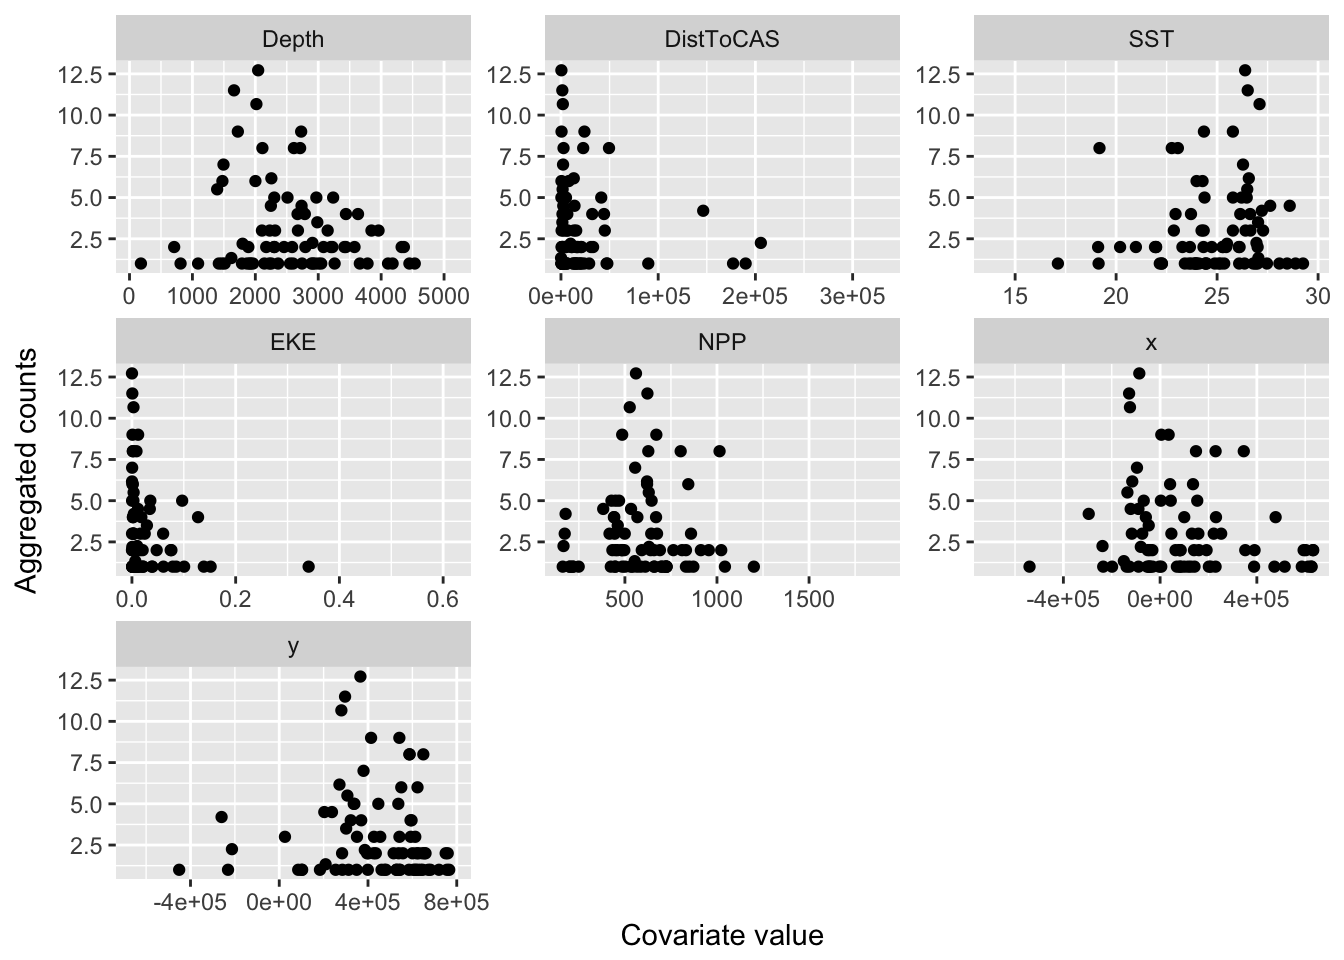 Relationship of segment counts to covariate values.